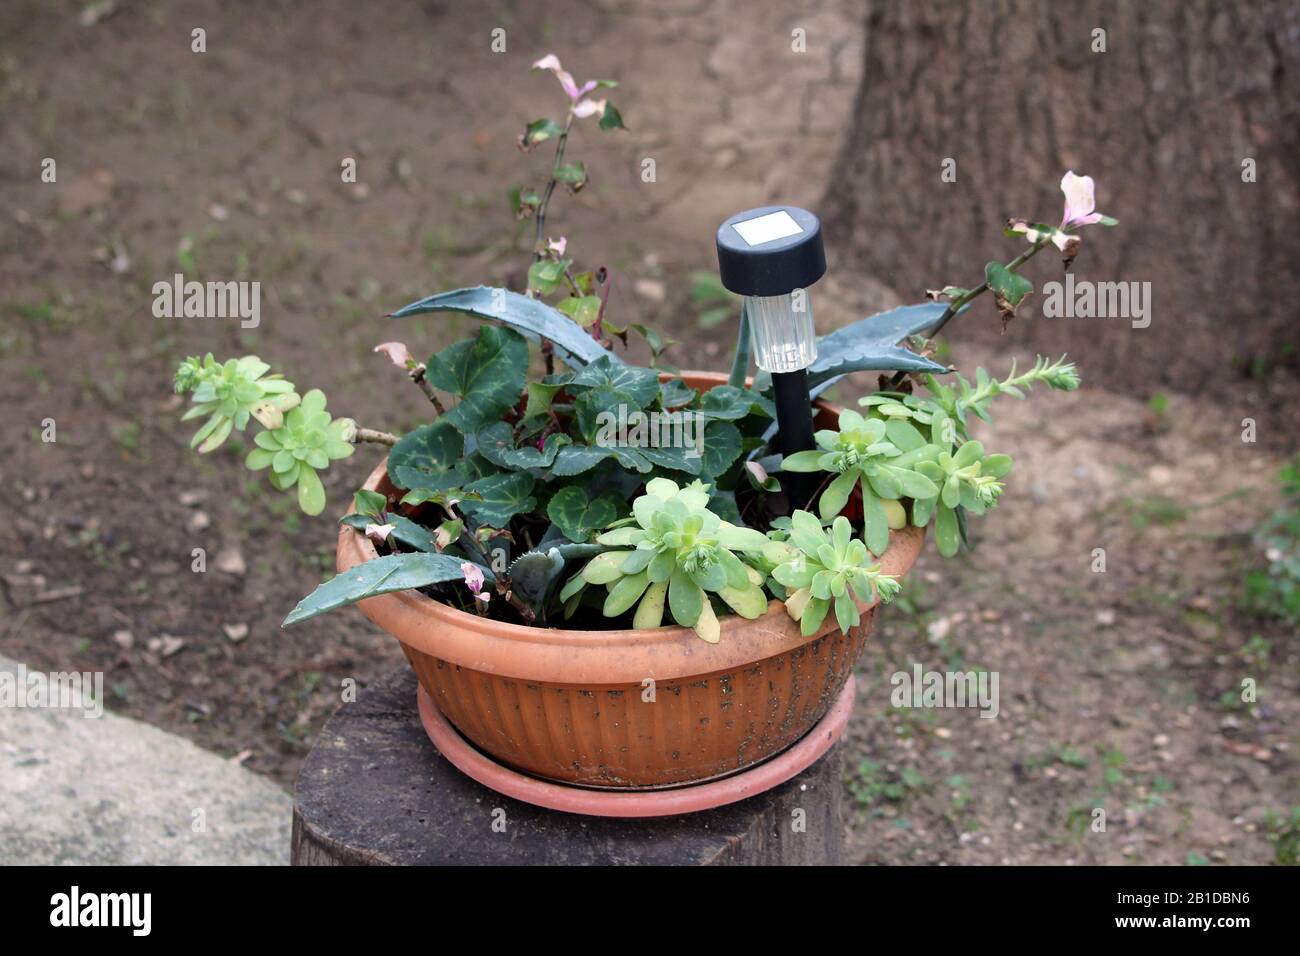 Flower pot filled with decorative garden solar lamp put between Agave monocot perennial ornamental plant mixed with Sedum or Stonecrop hardy perennial Stock Photo